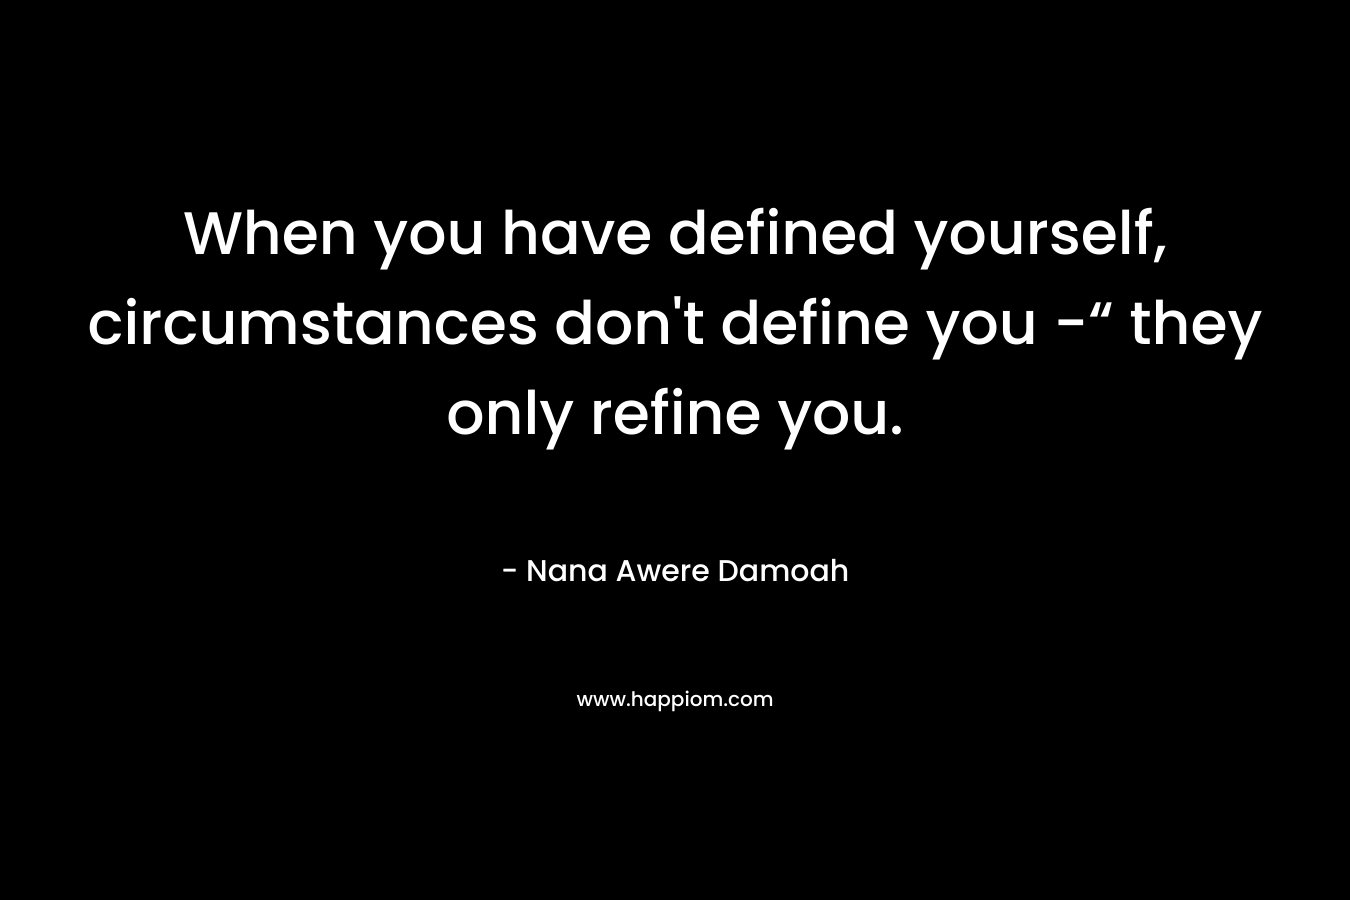 When you have defined yourself, circumstances don’t define you -“ they only refine you. – Nana Awere Damoah